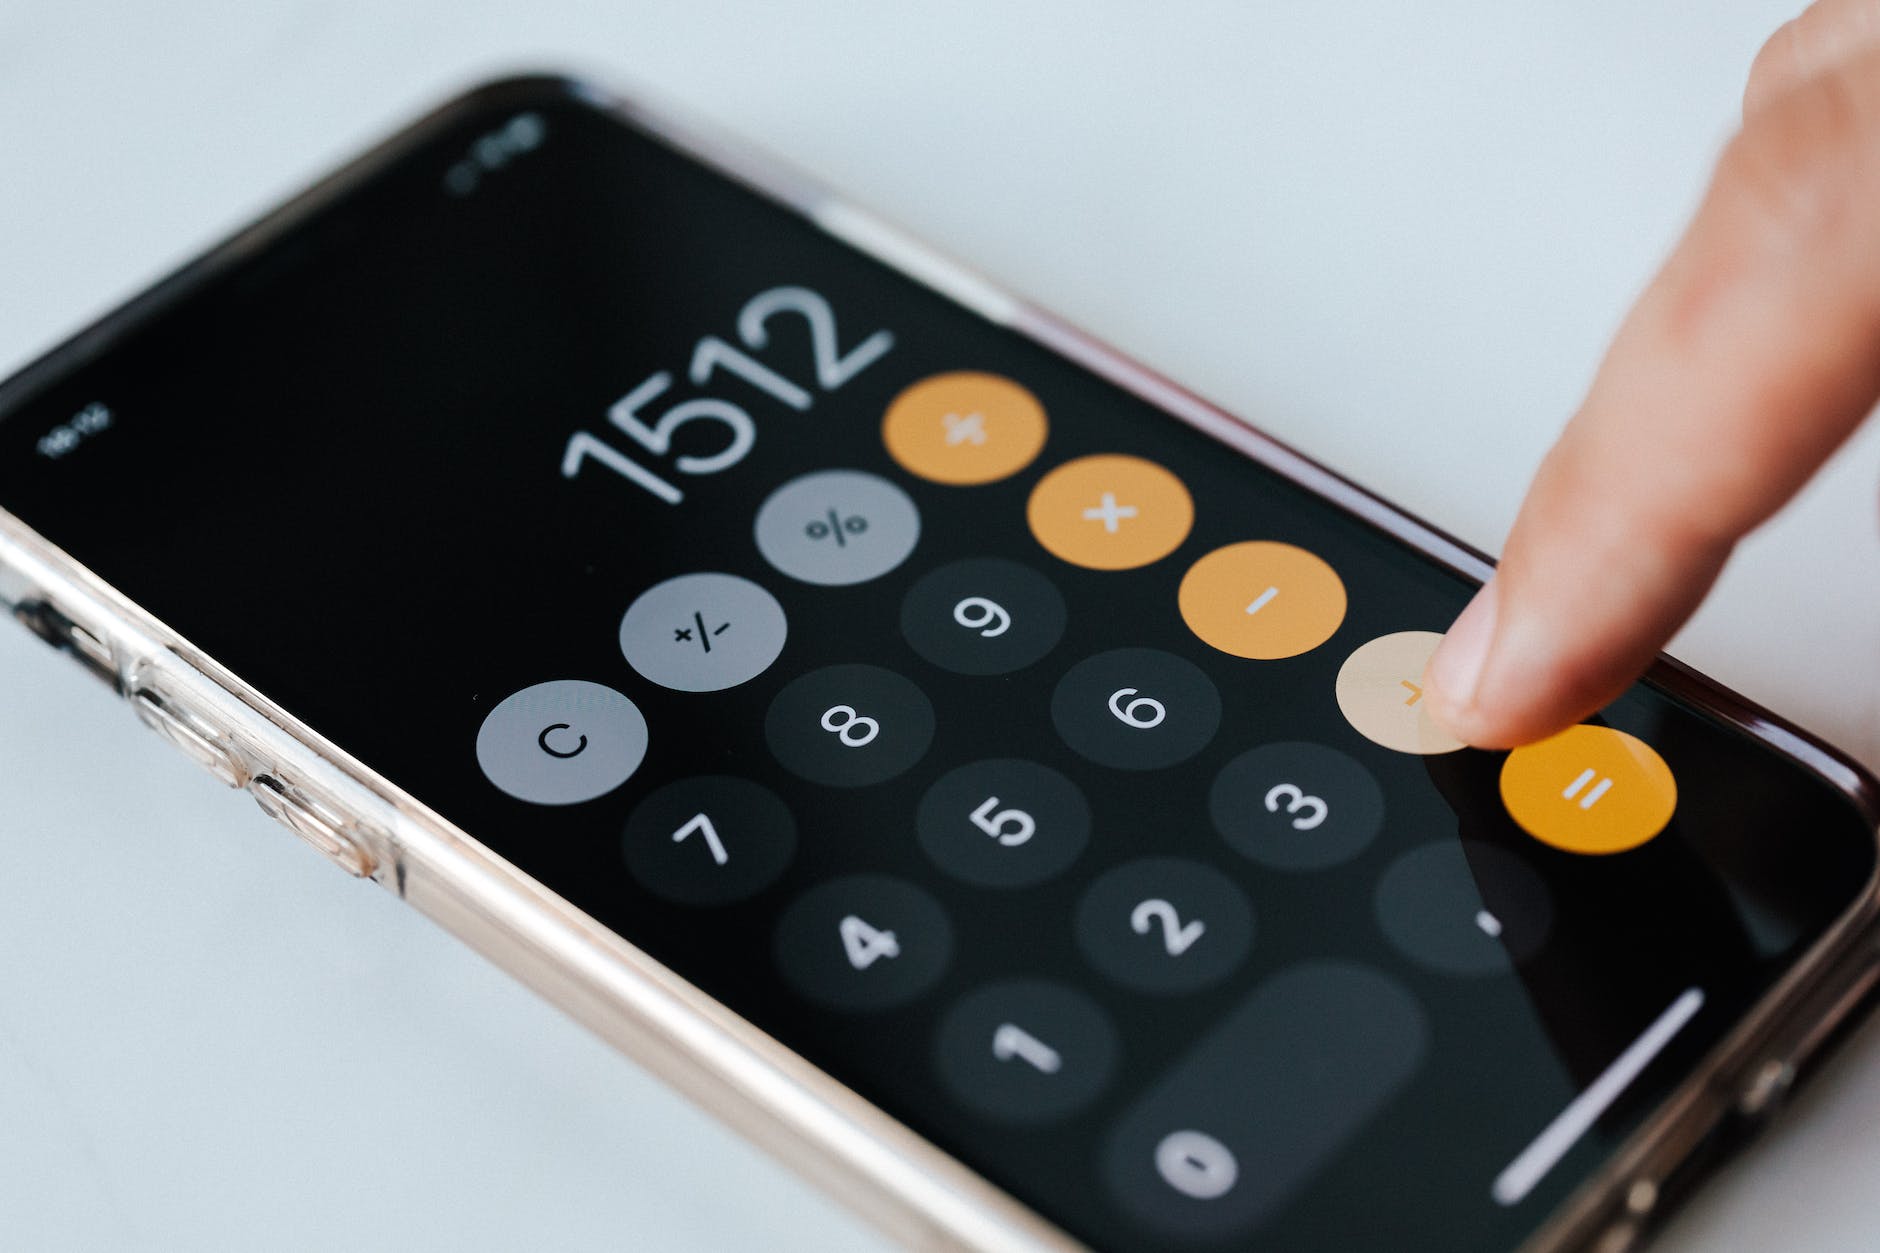 close up photo of calculator display on a smartphone